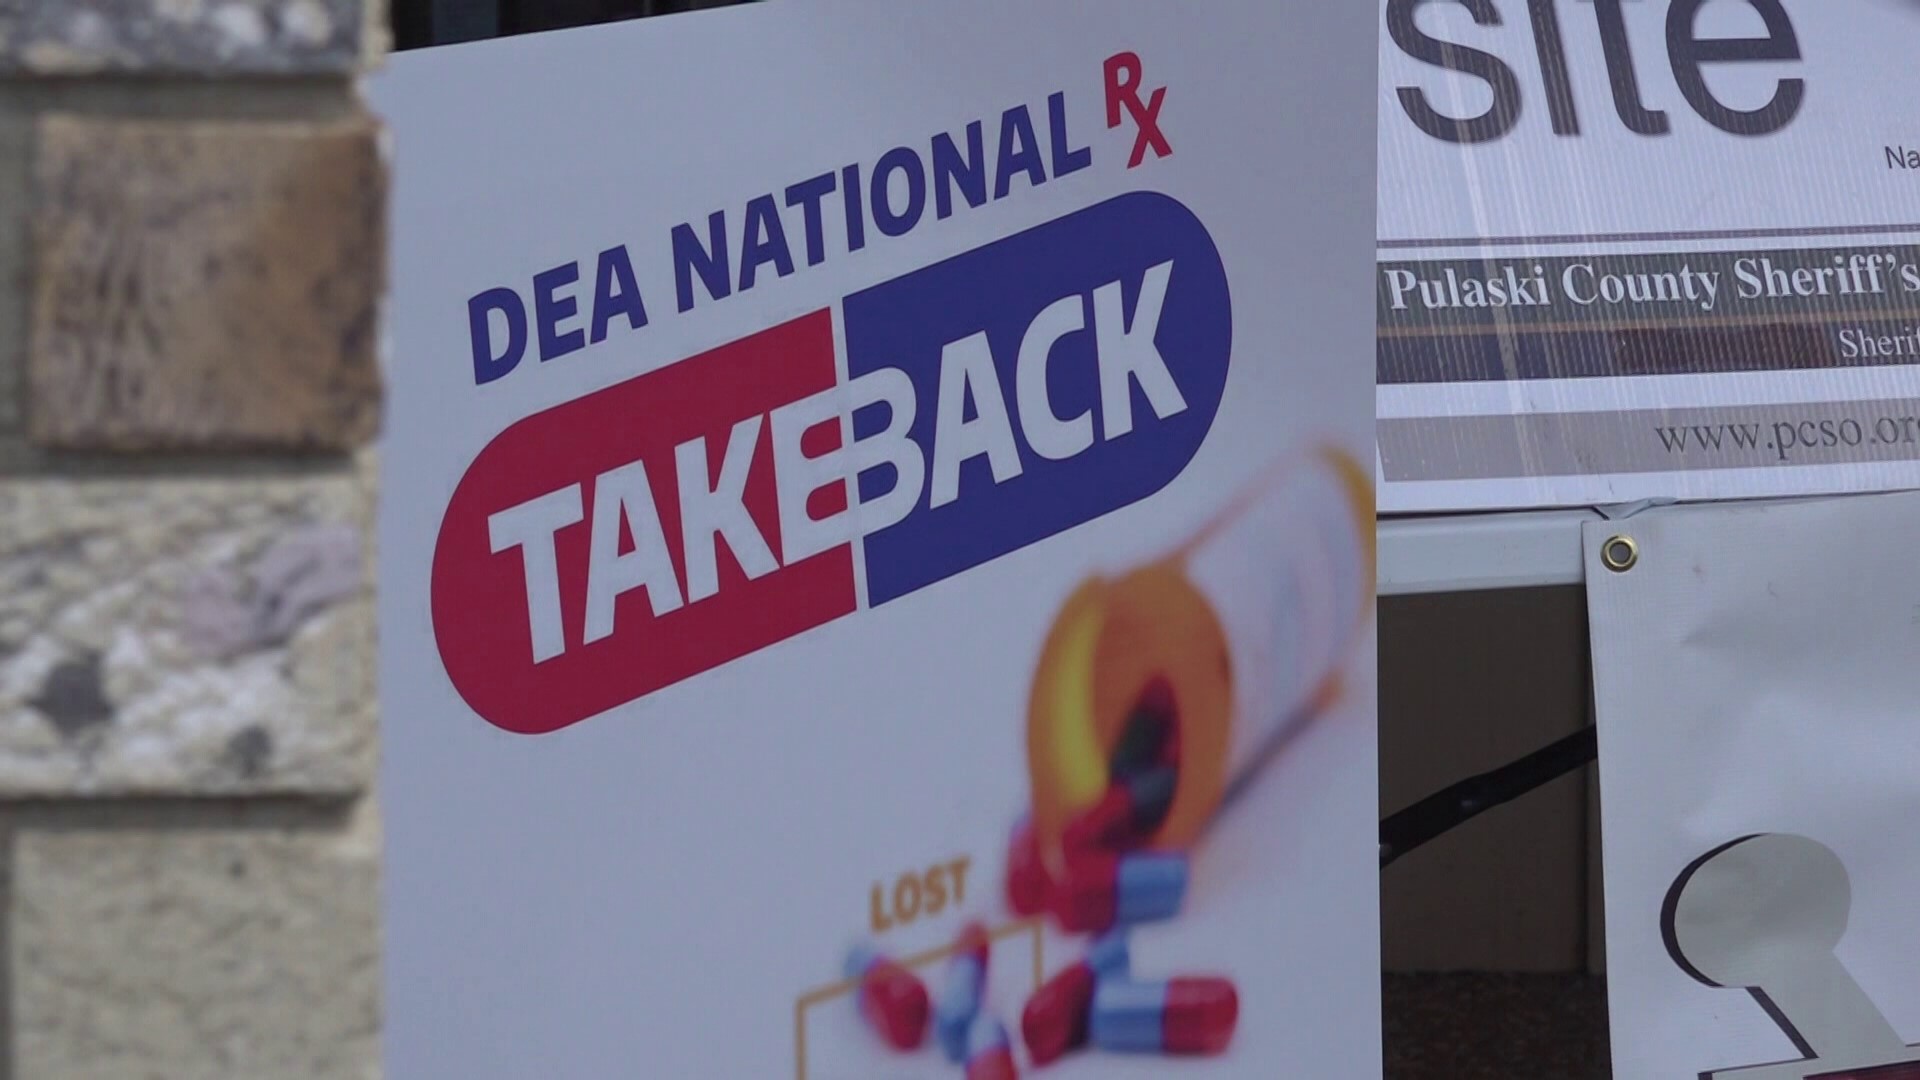 As a part of National Drug Take Back Day, cities in our area took back drugs at different locations.